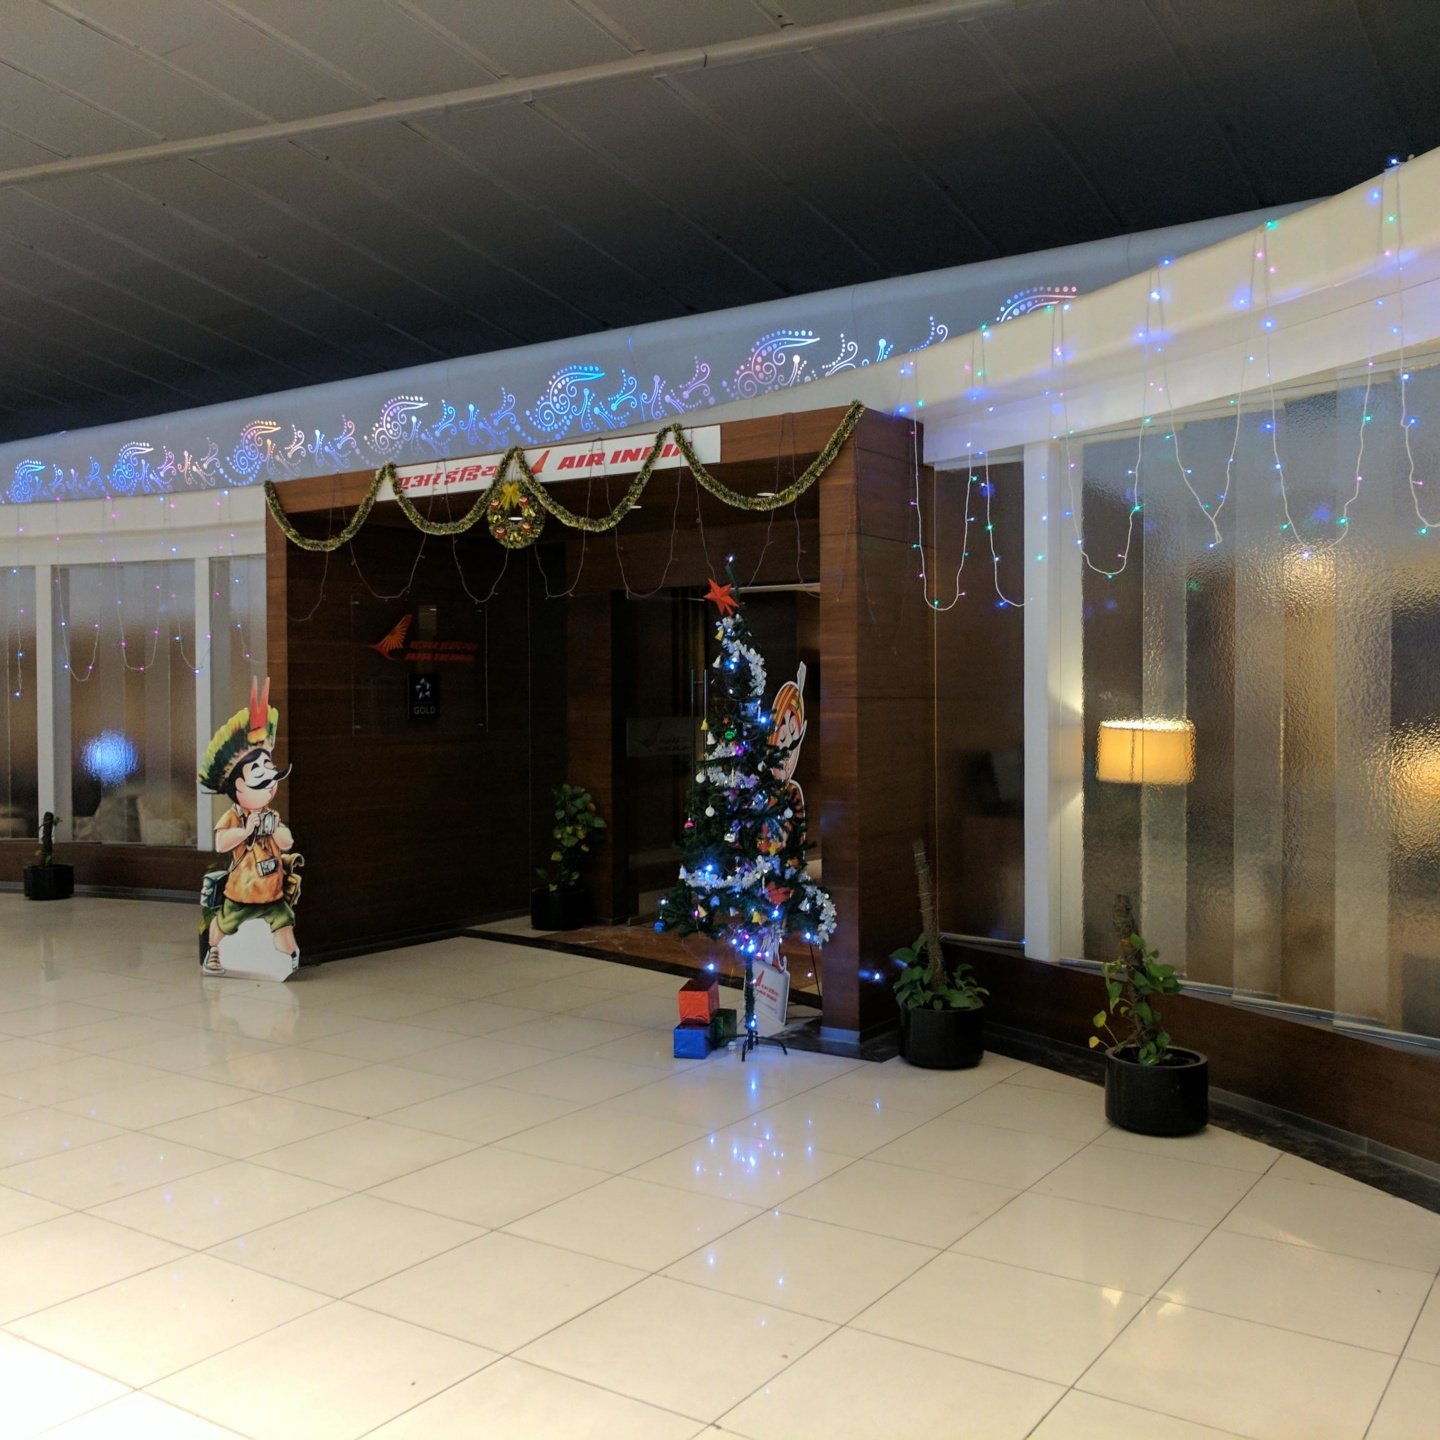 Air India Lounge Delhi T3 – The Best of Air India is on the ground?!